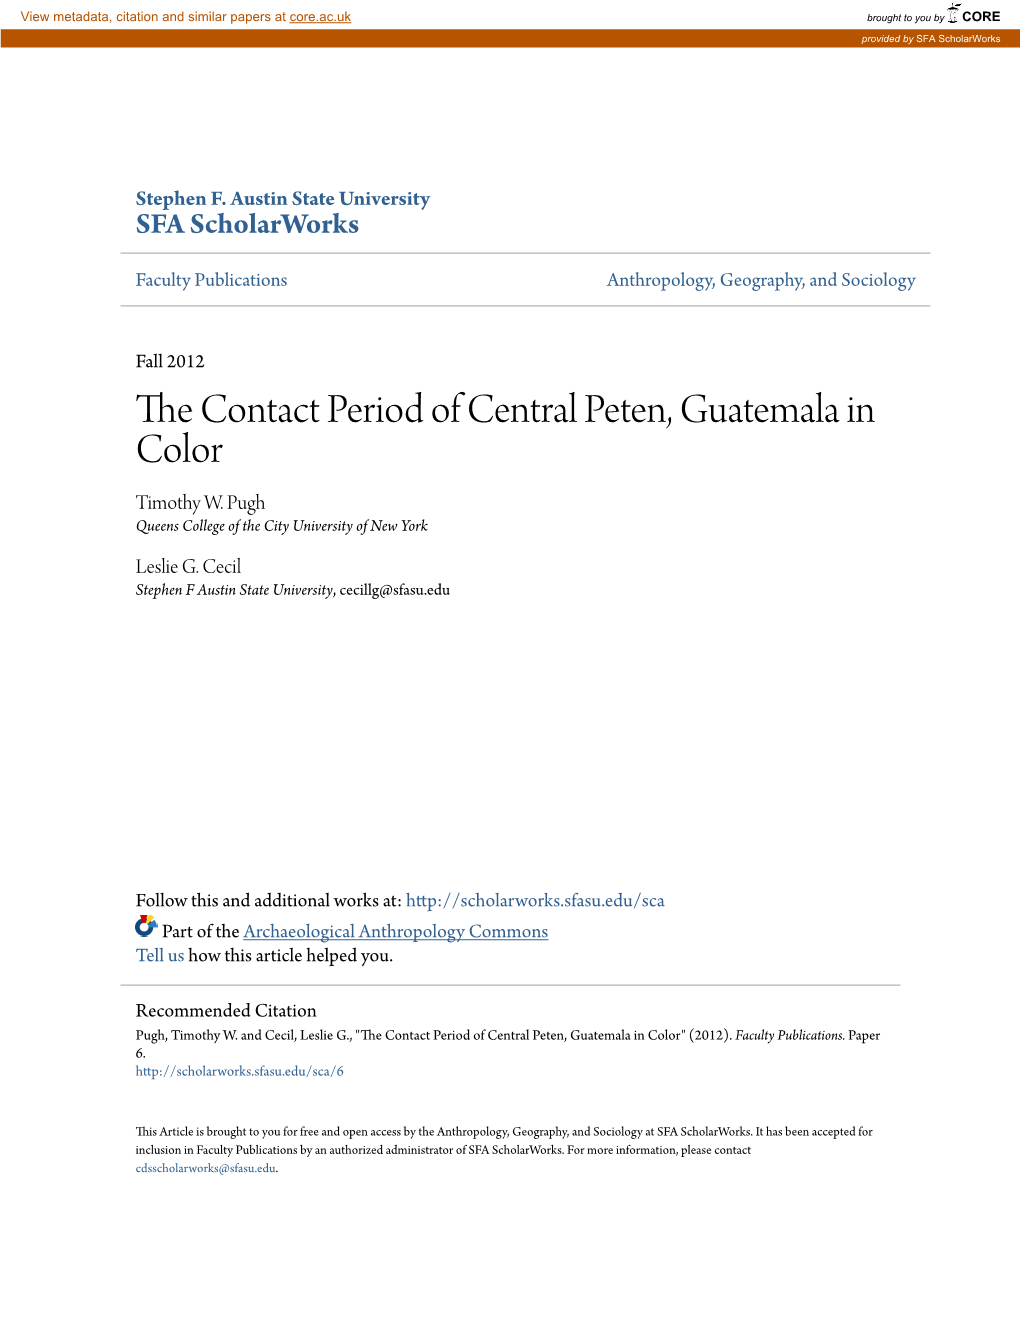 The Contact Period of Central Peten, Guatemala in Color